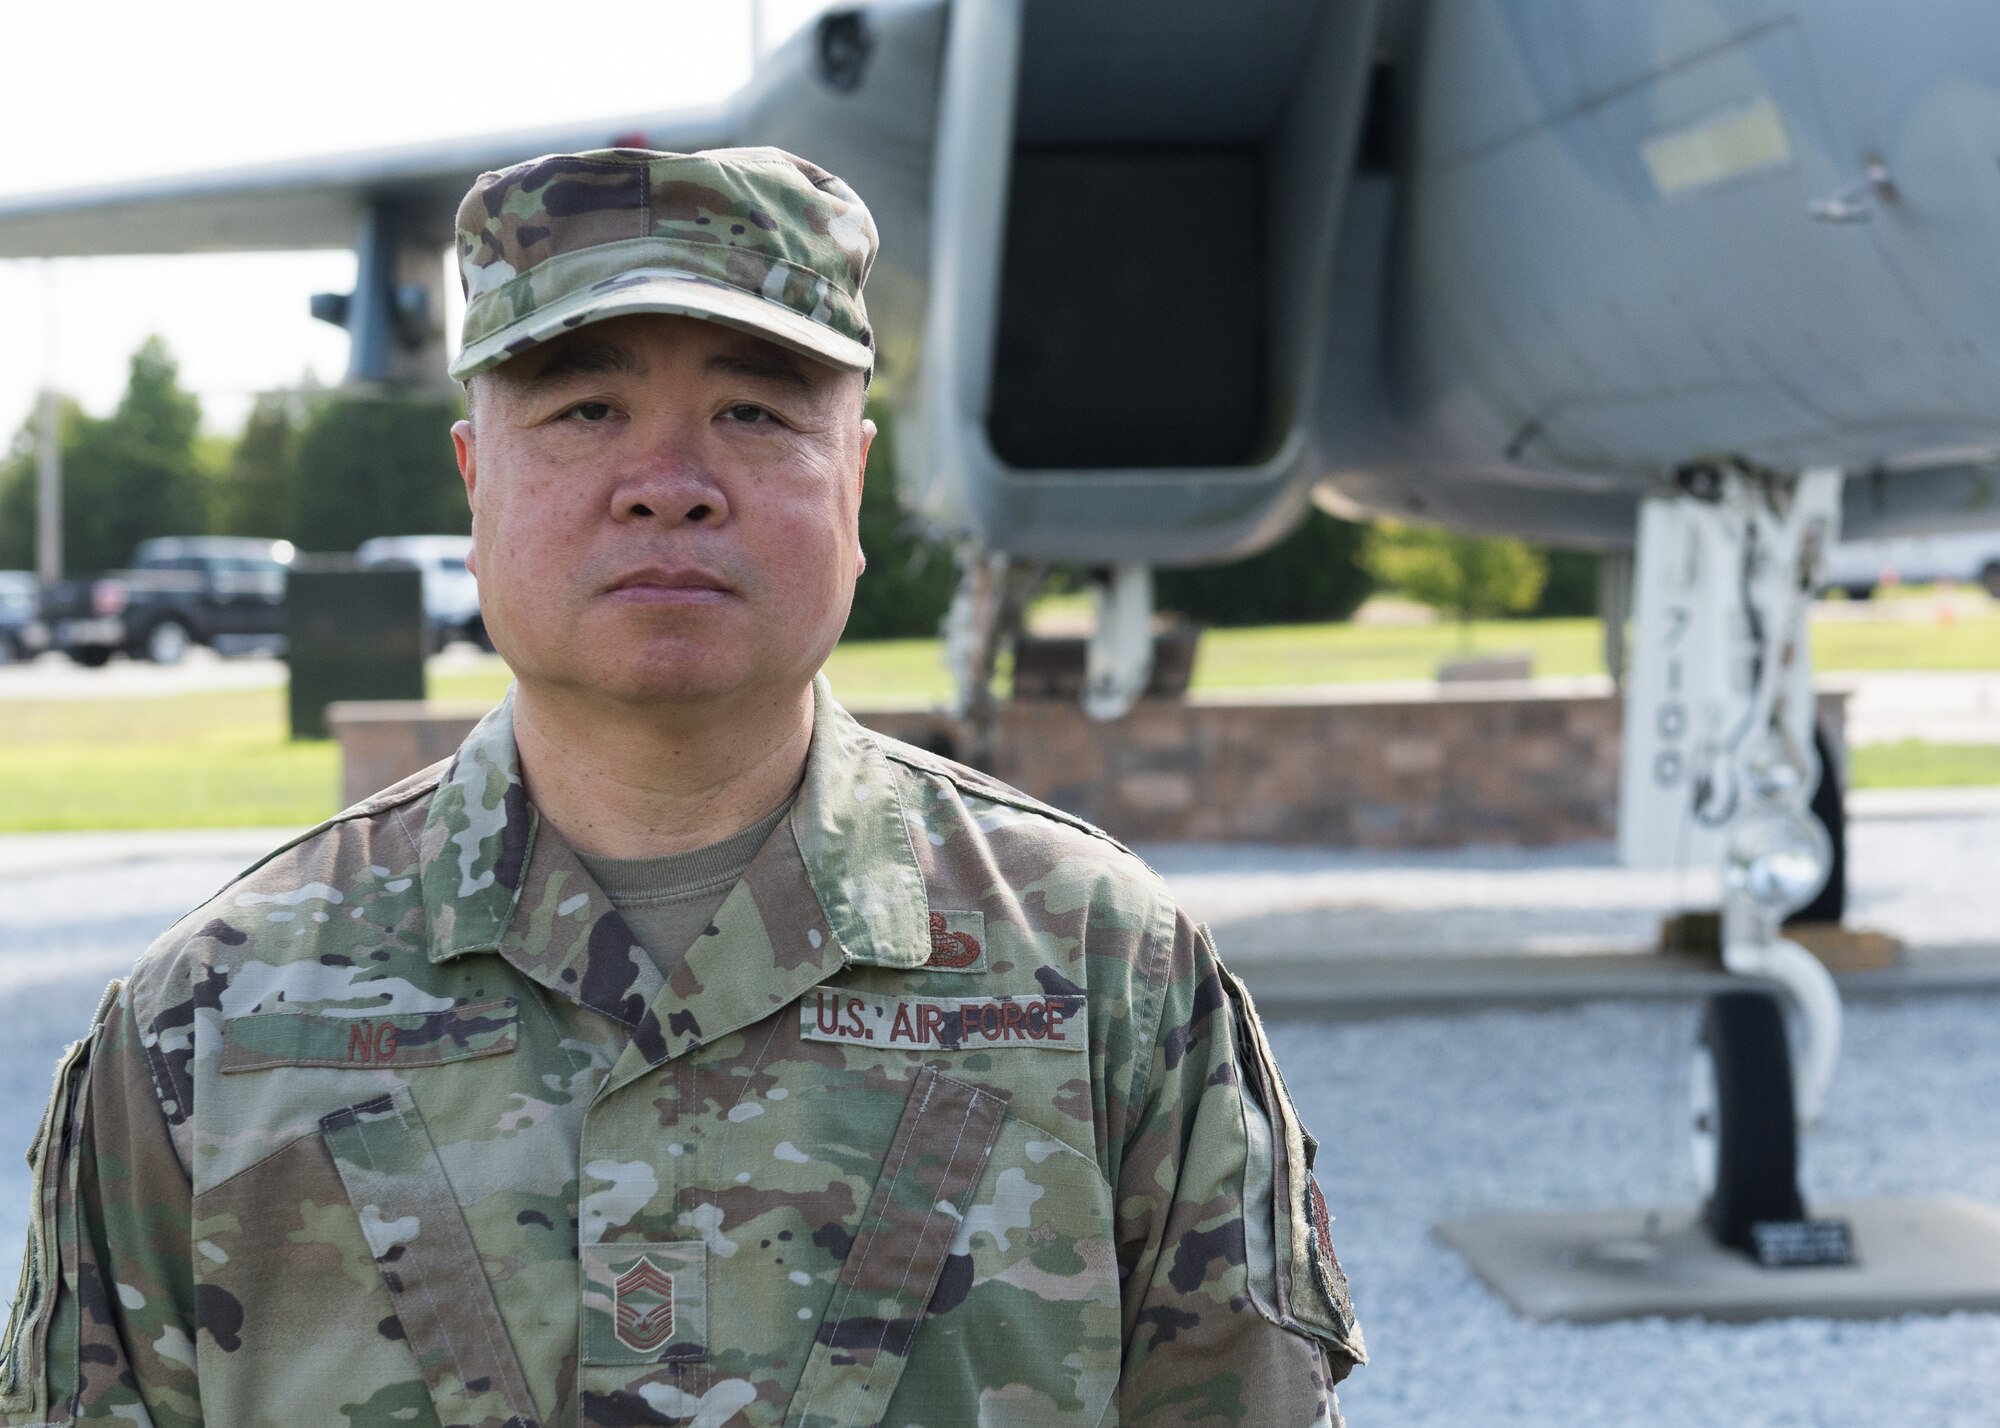 Chief Master Sgt. Wing Ng standing in front of an F-15A at Otis ANGB